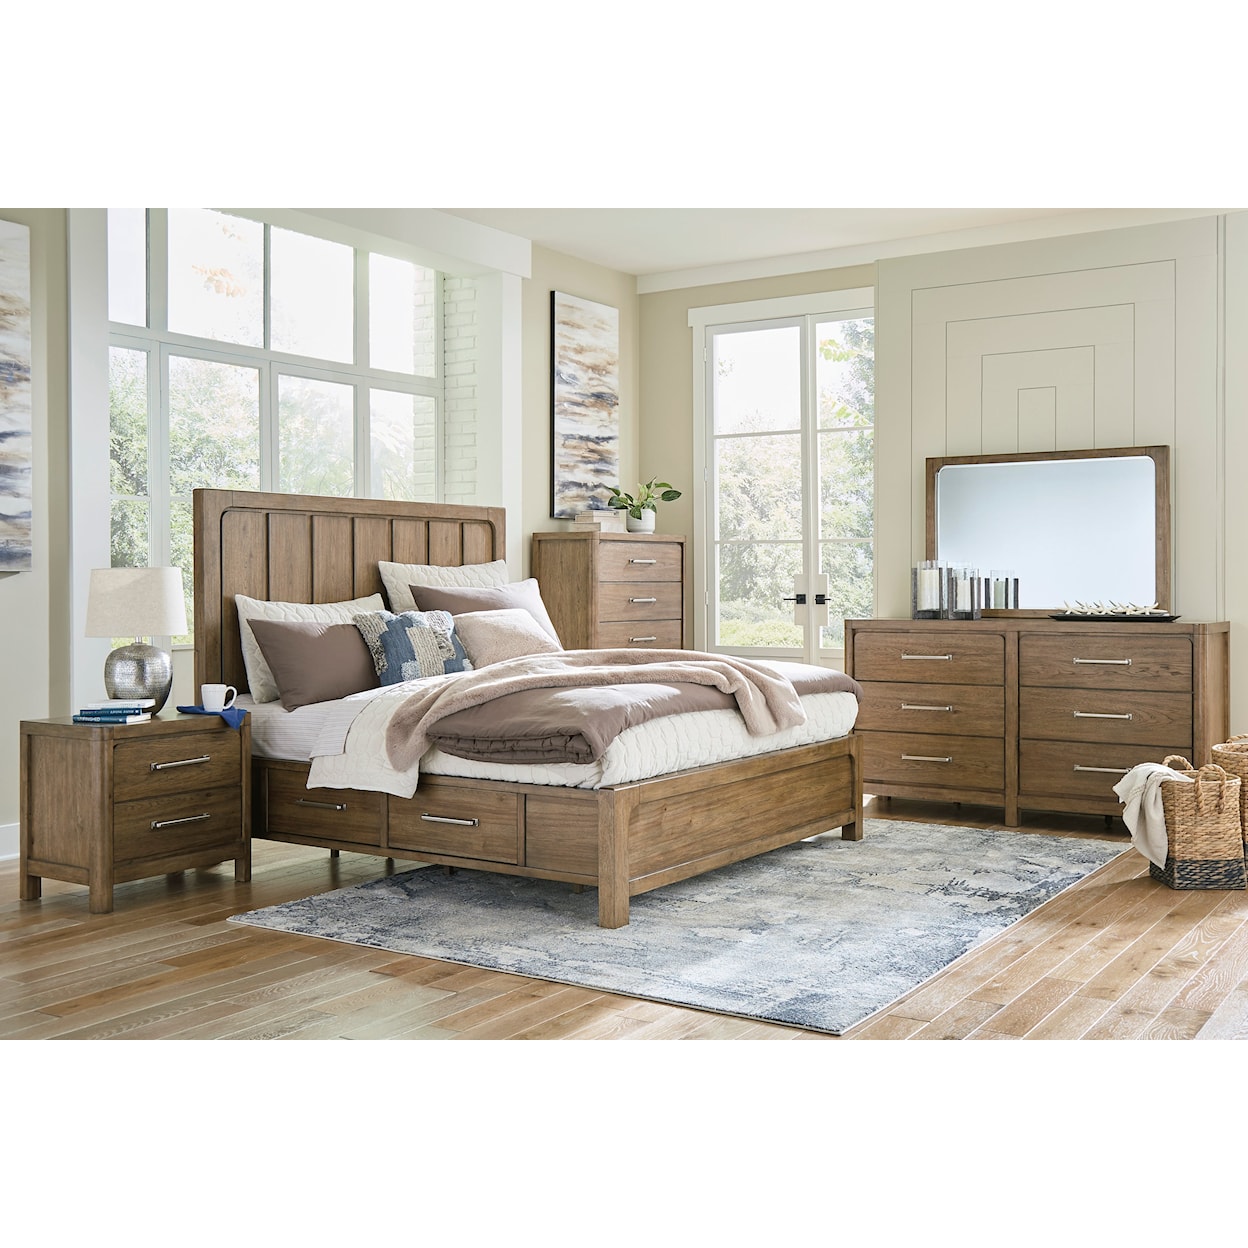 Signature Design by Ashley Furniture Cabalynn 5-Piece Queen Bedroom Set